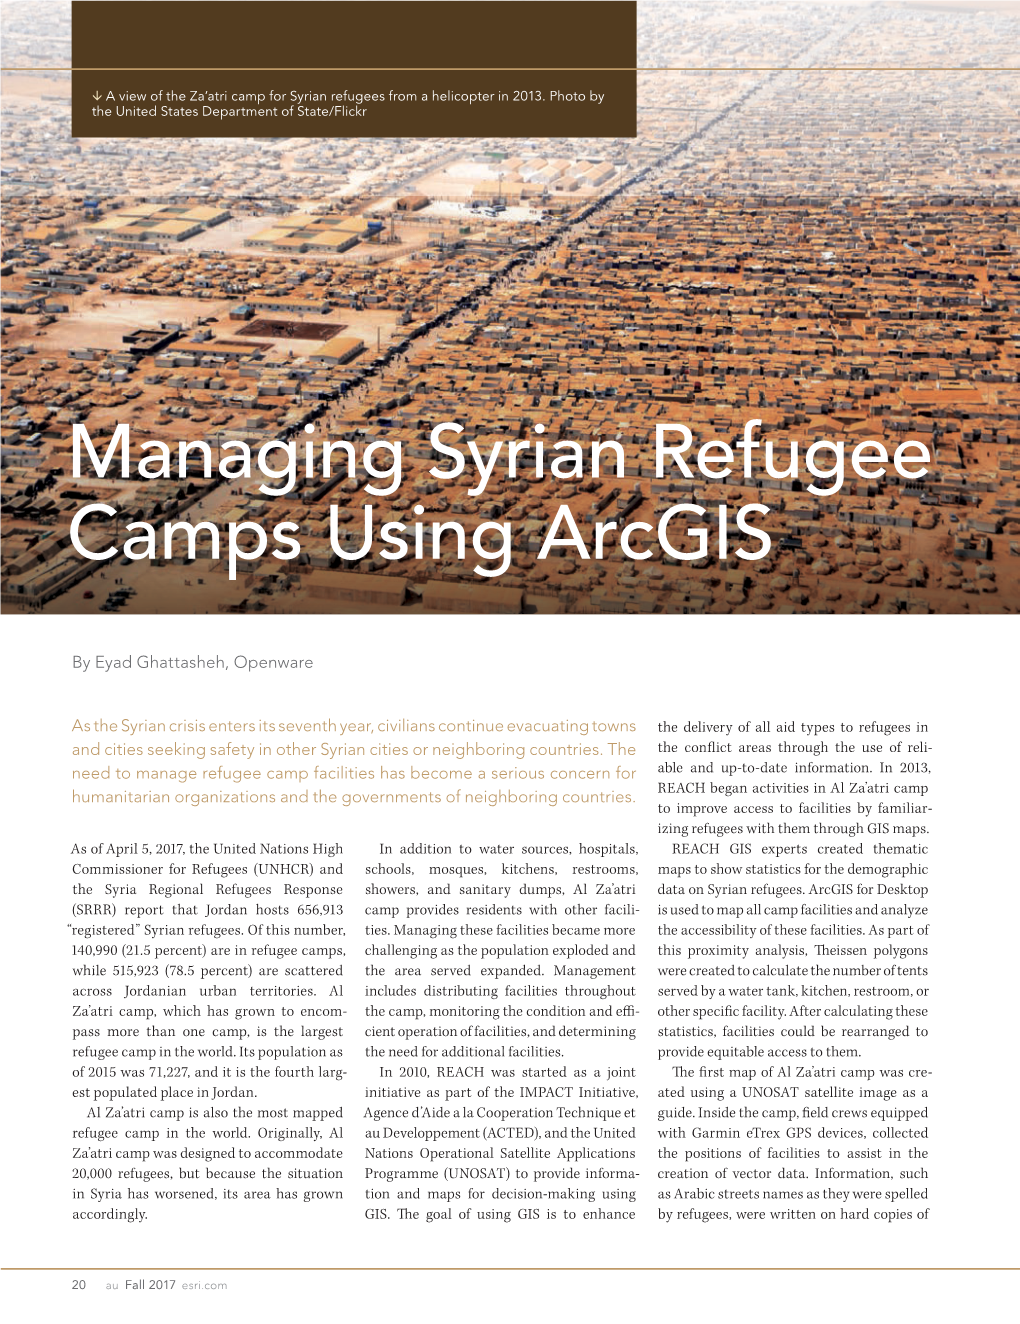 Managing Syrian Refugee Camps Using Arcgis